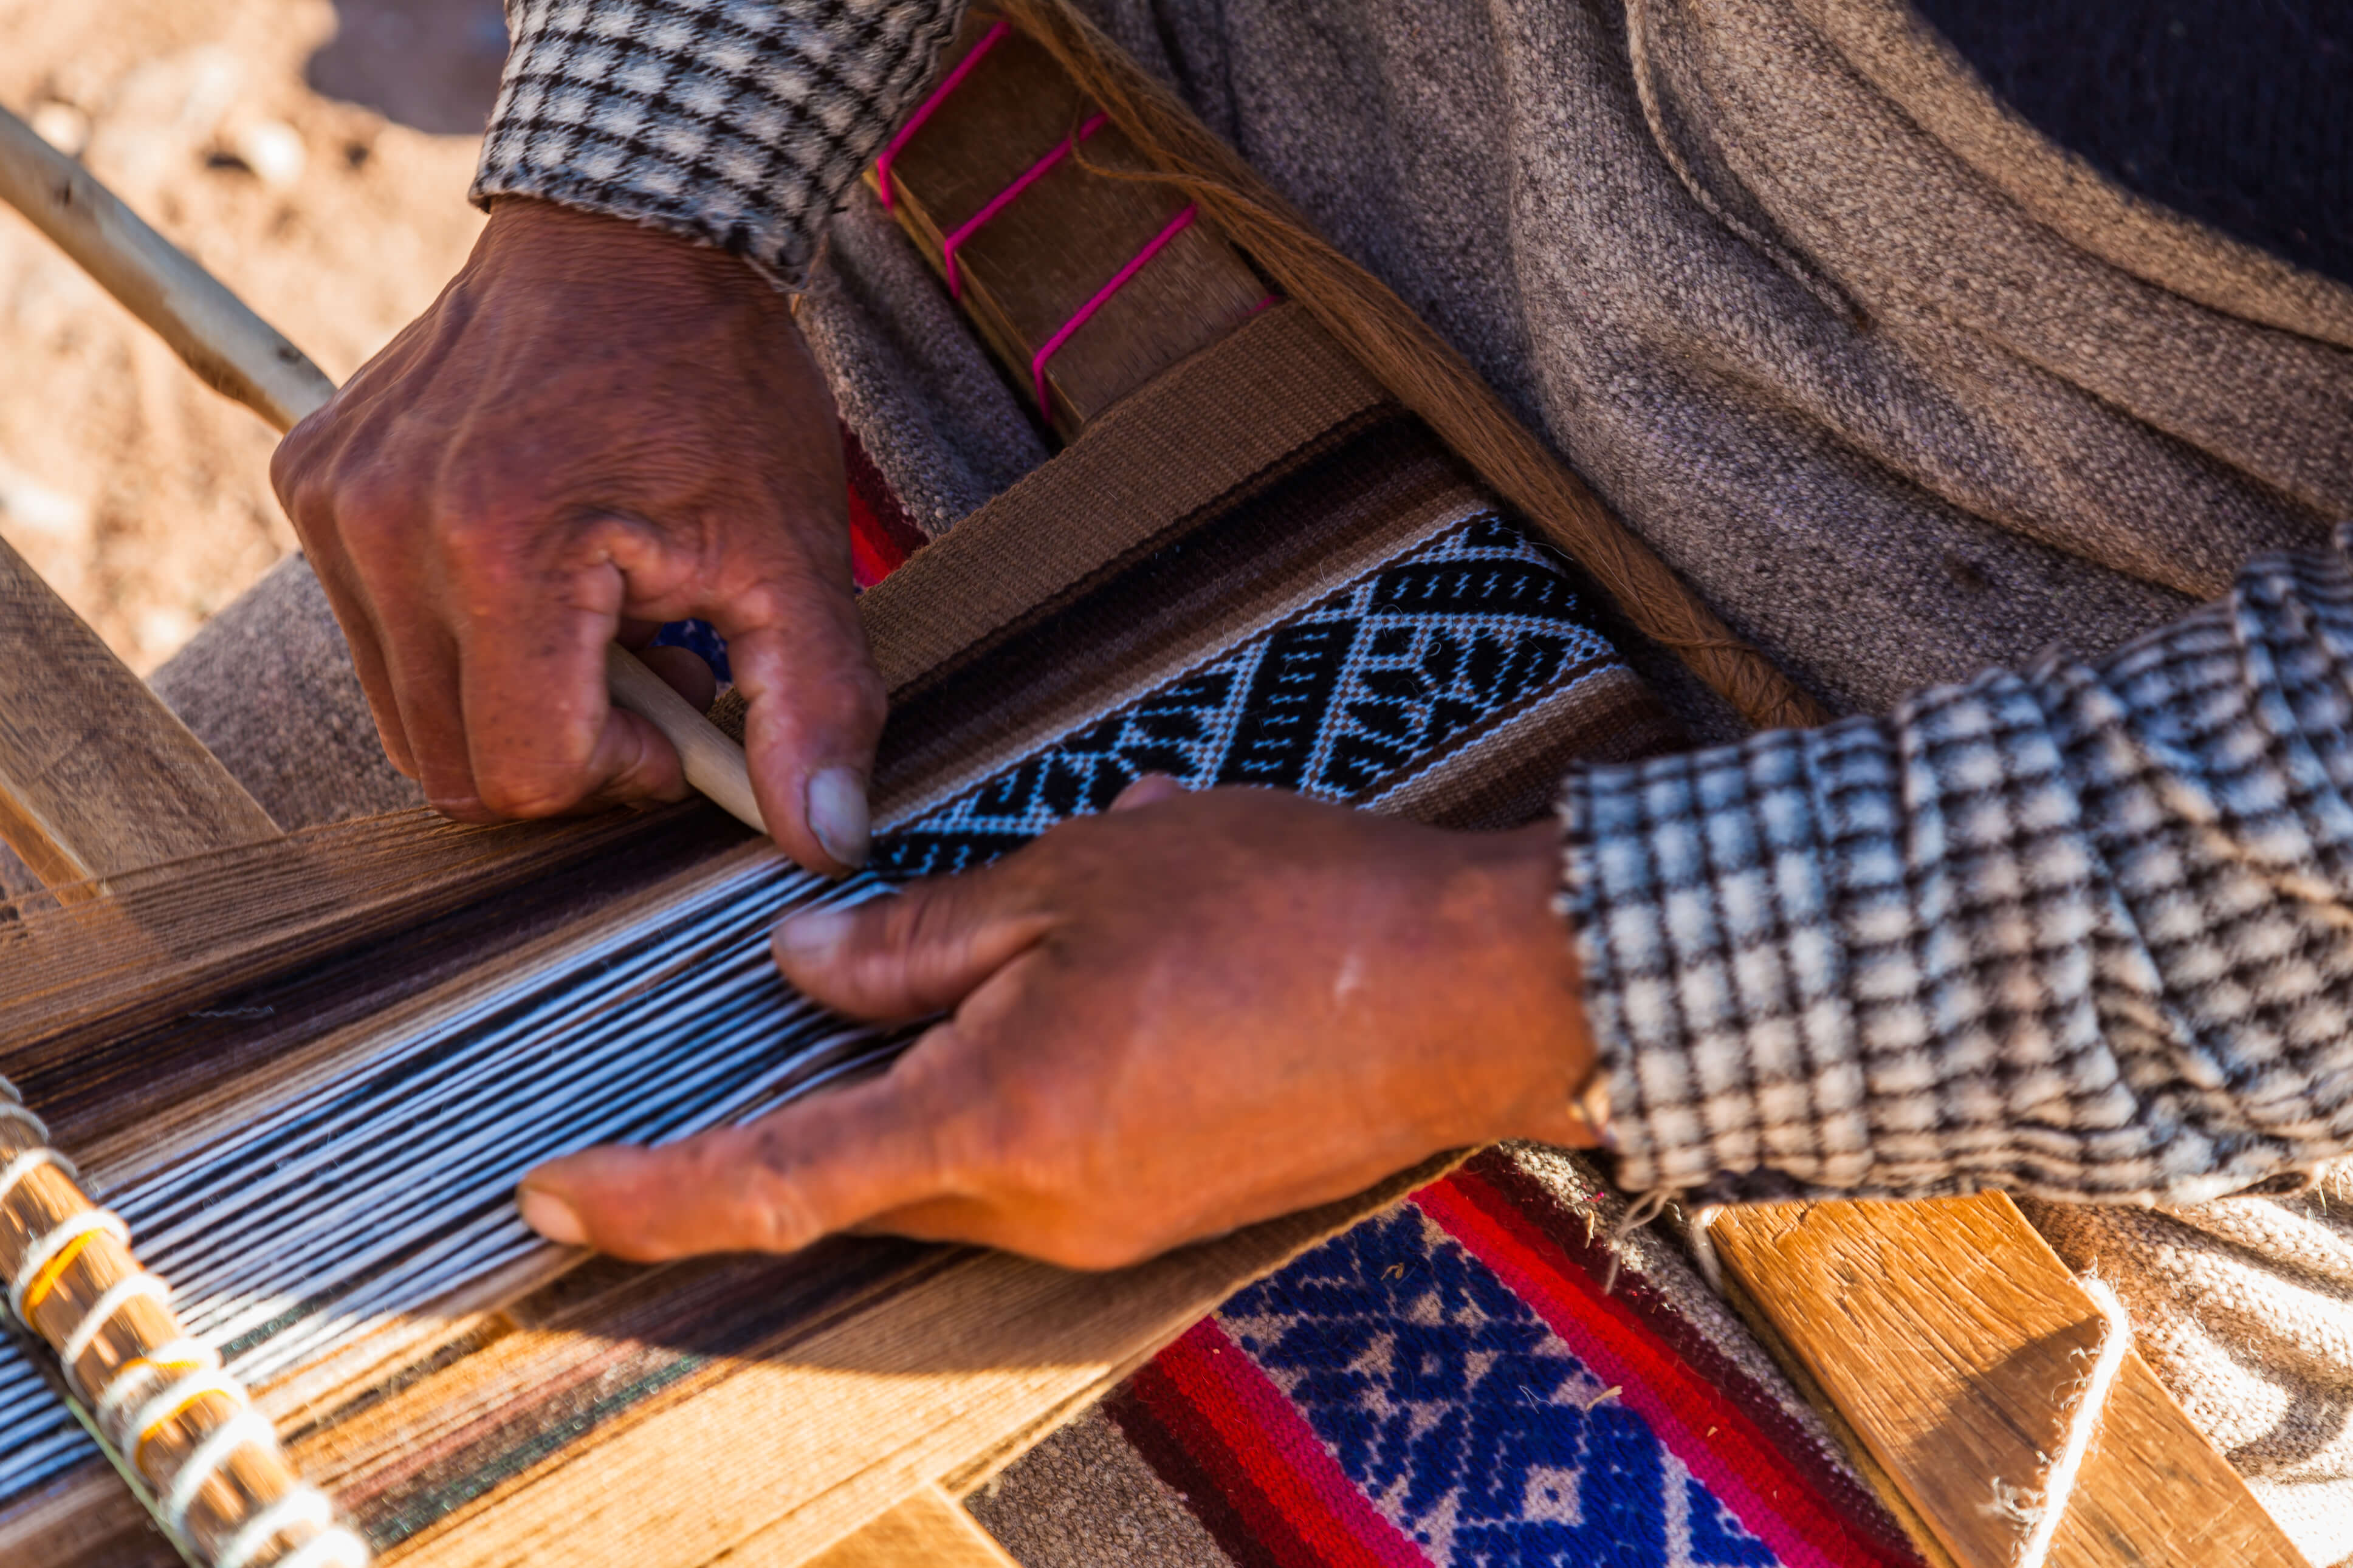 A Woman Weaver Creates an intricate design on her loom 